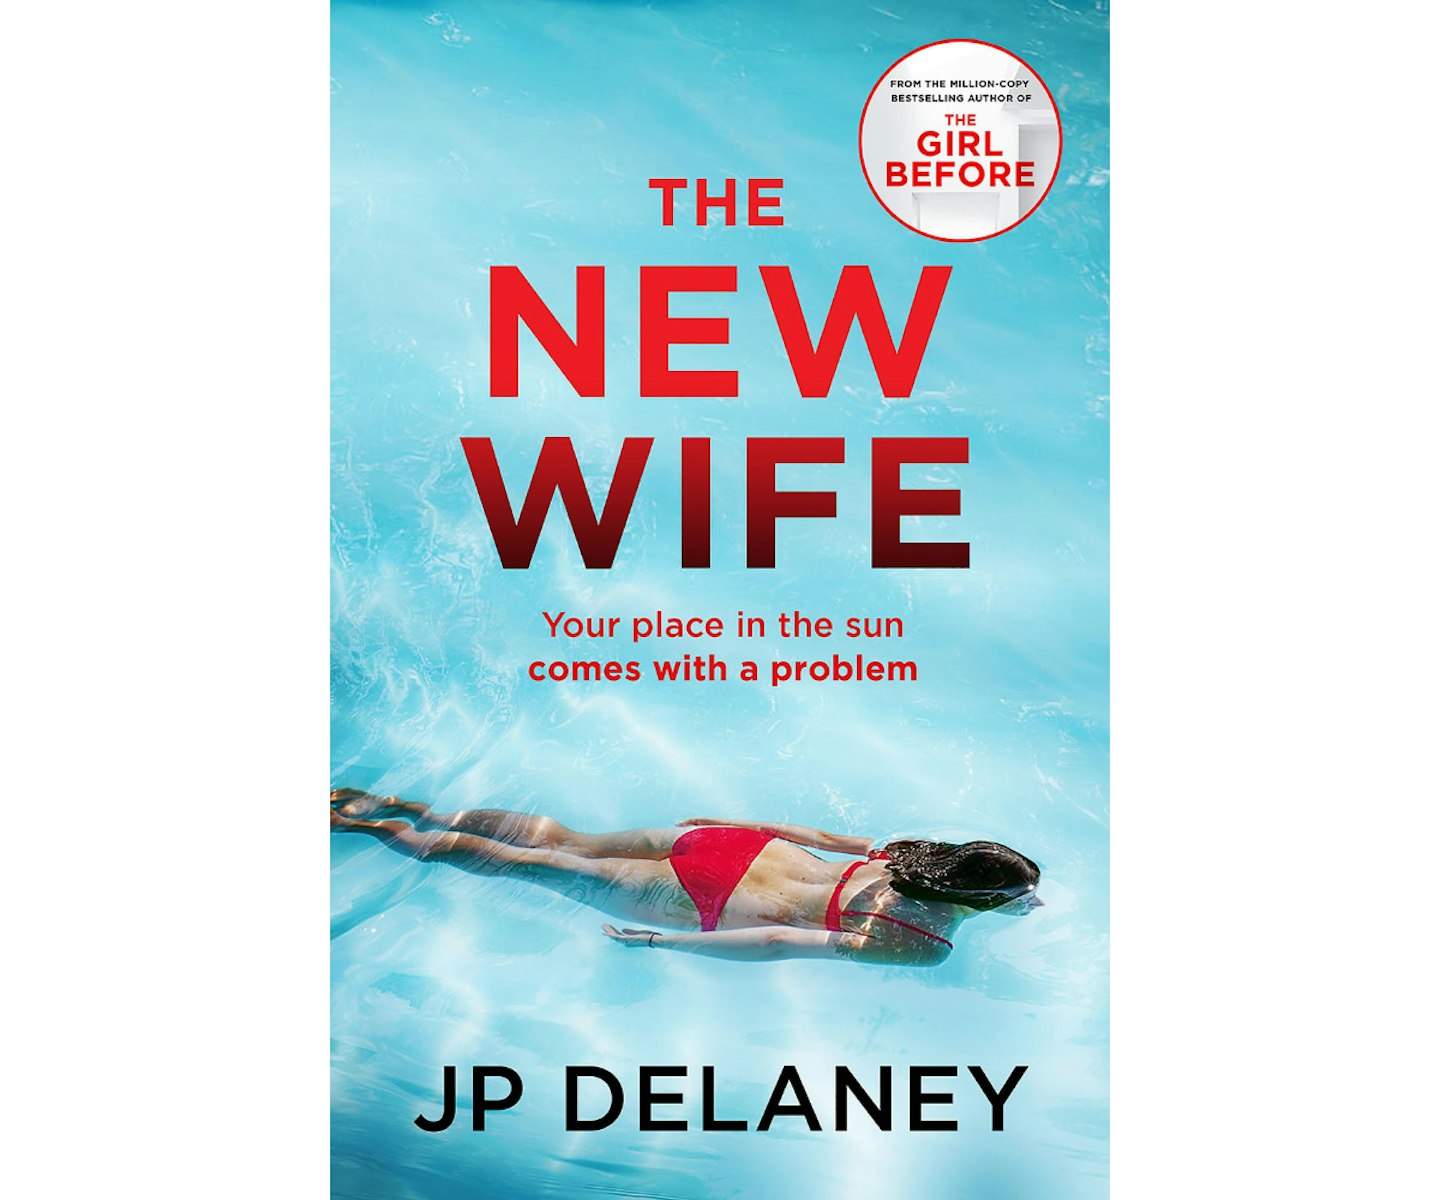 The New Wife by JP Delaney